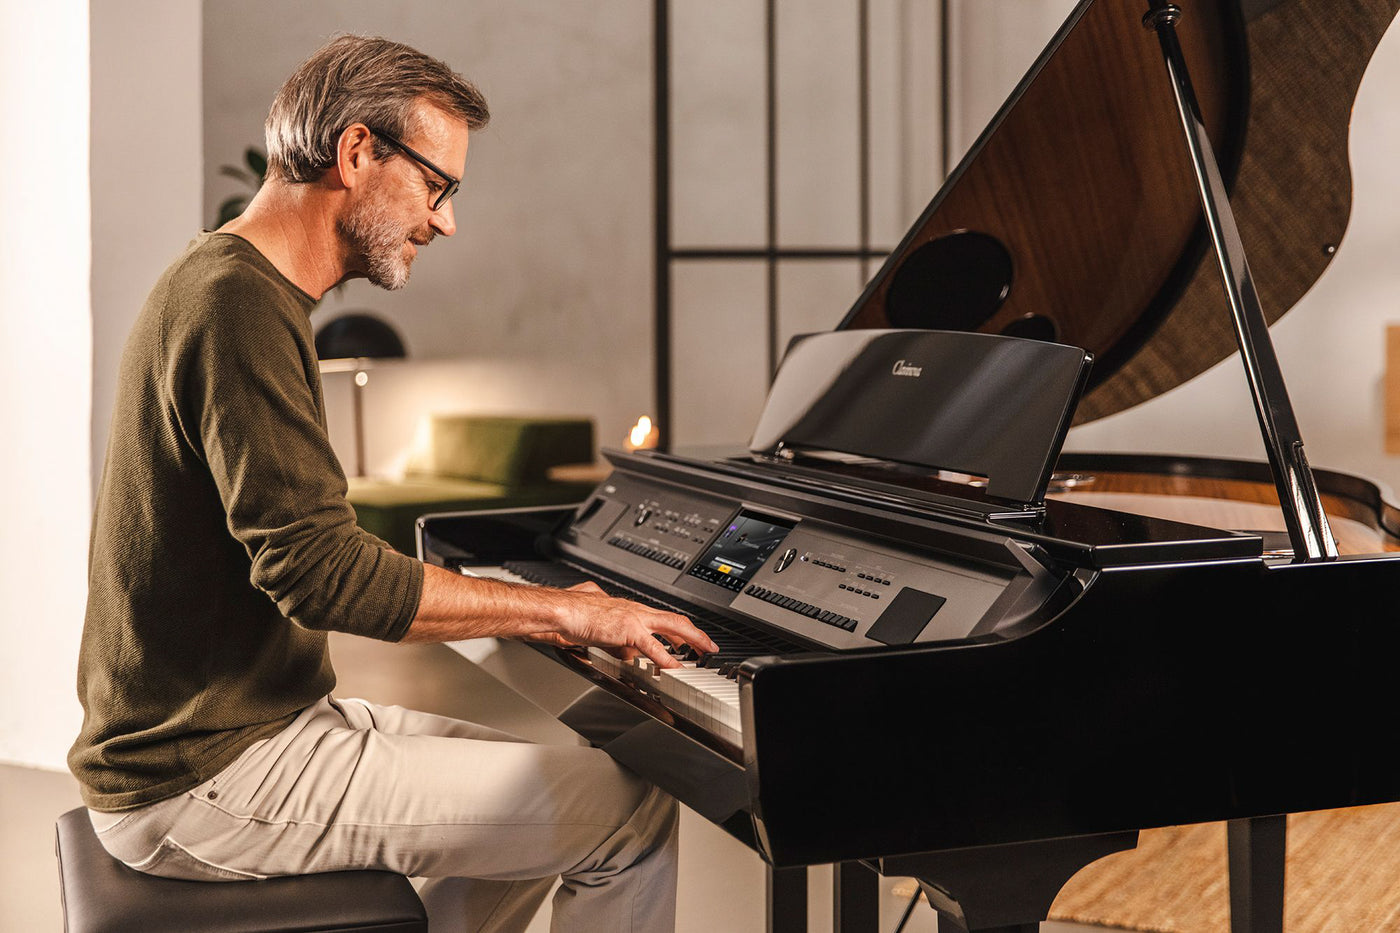 Man playing a digital grand piano in a well-lit room, reflecting a modern approach to piano design and technology.